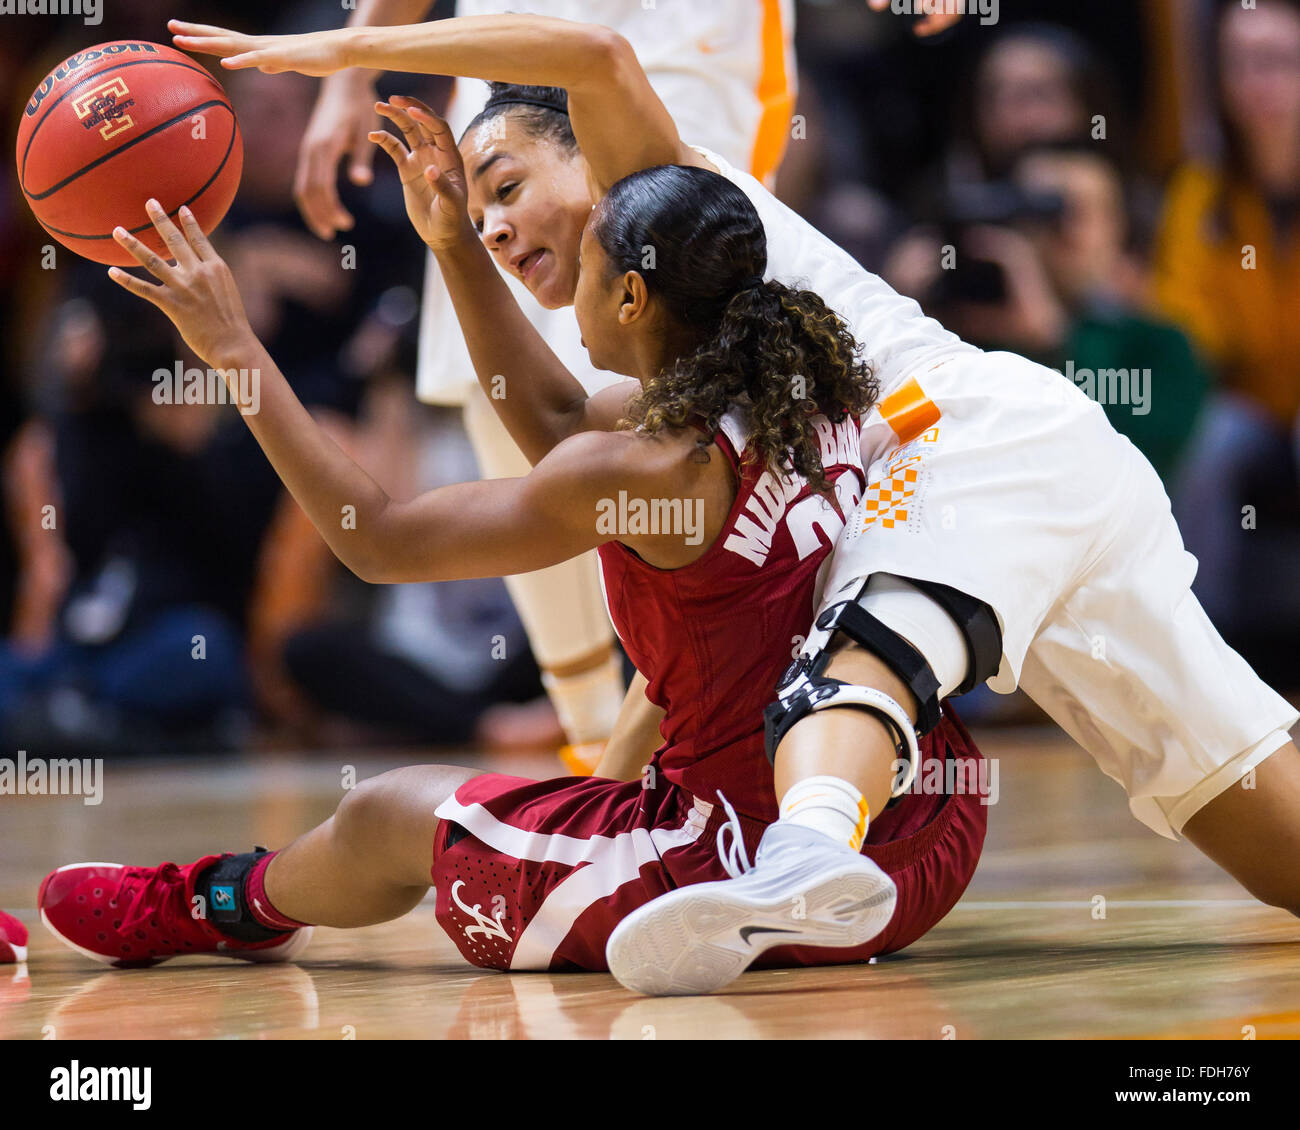 January 31, 2016: Andraya Carter #14 of the Tennessee Lady Volunteers and Karyla Middlebrook #22 of the Alabama Crimson Tide battle for a loose ball during the NCAA basketball game between the University of Tennessee Lady Volunteers and the University of Alabama Crimson Tide at Thompson Boling Arena in Knoxville TN Tim Gangloff/CSM Stock Photo